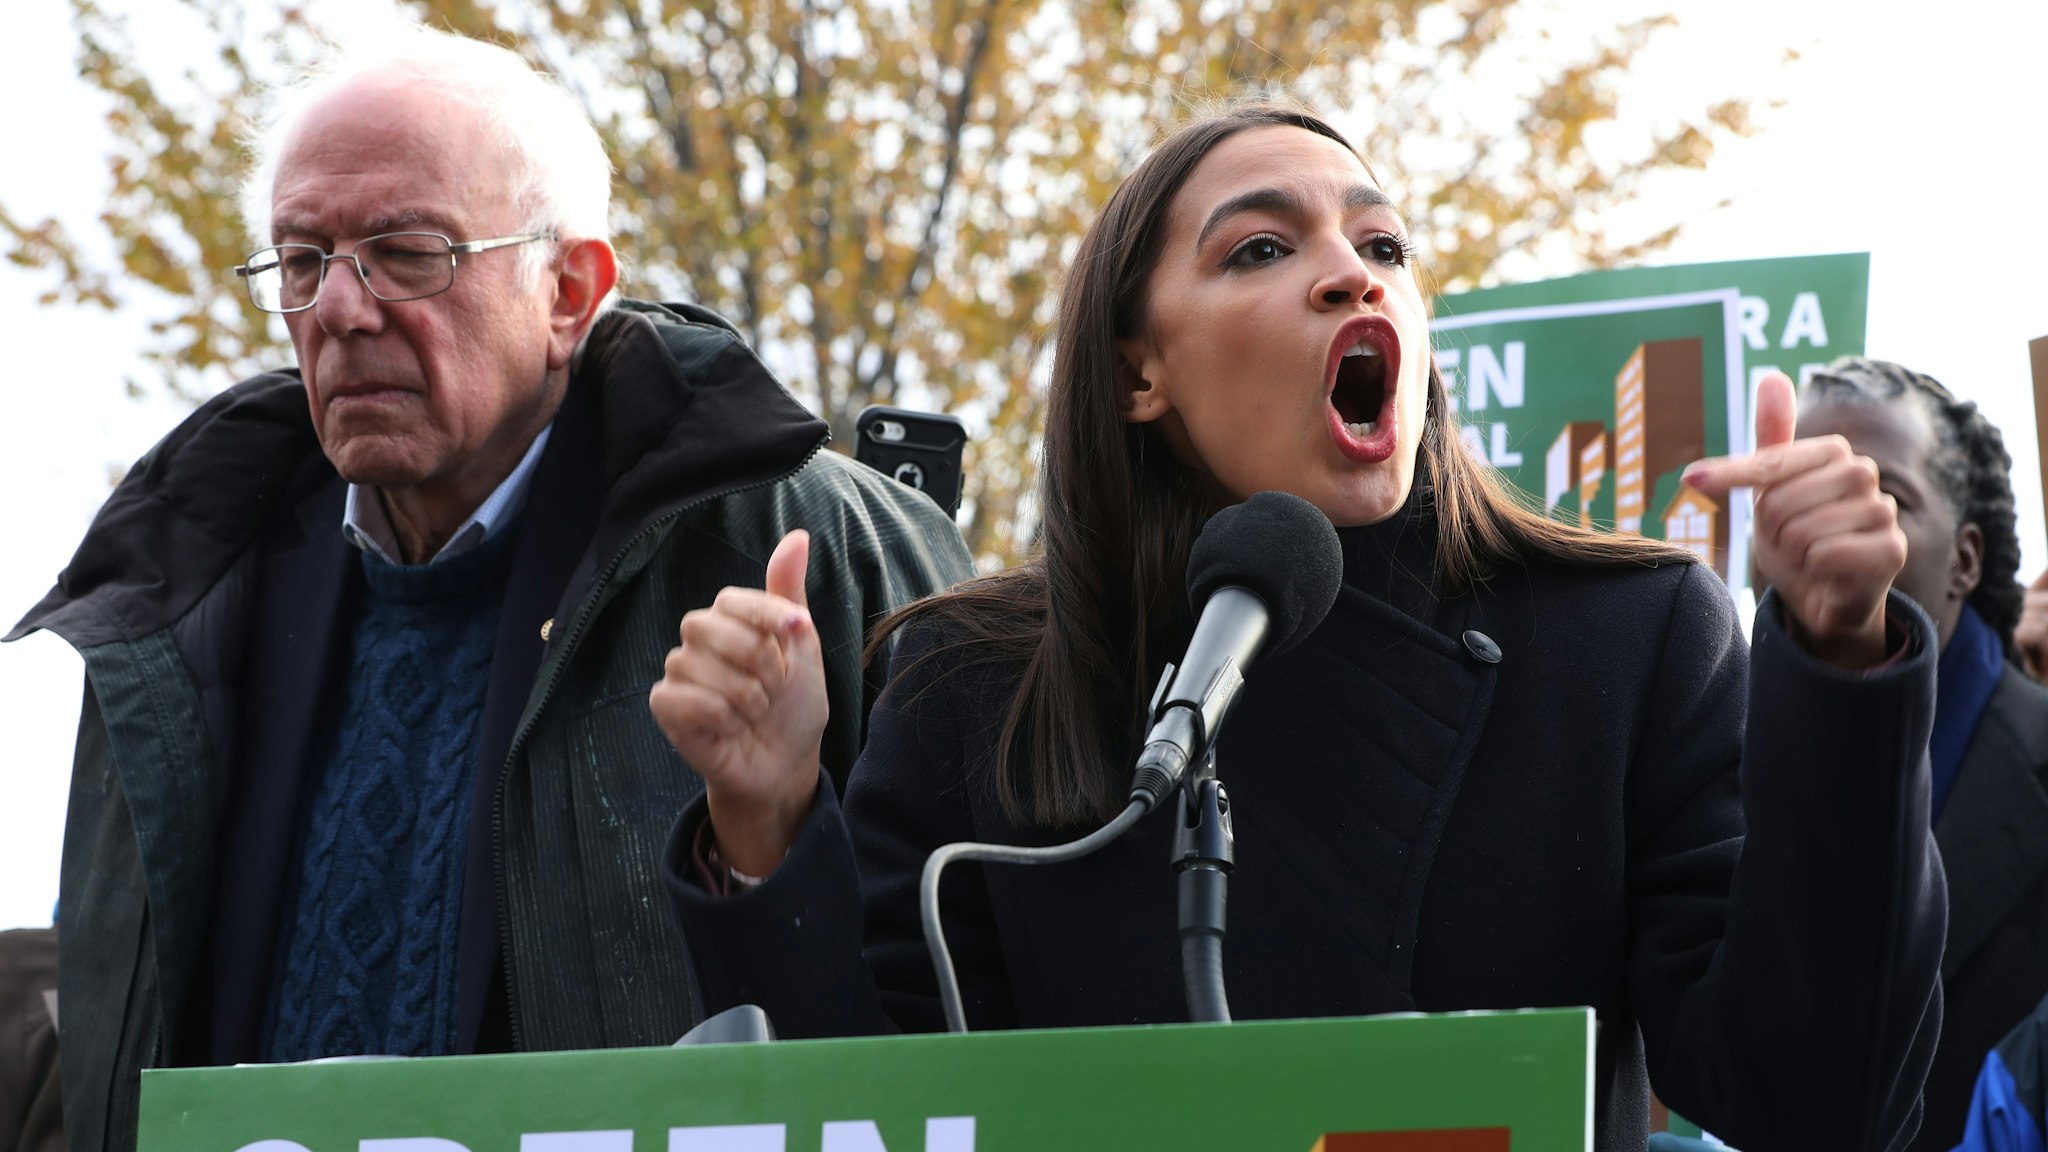 Democratic presidential candidate Sen. Bernie Sanders (I-VT) (L) and Rep. Alexandria Ocasio-Cortez (D-NY) hold a news conference to introduce legislation to transform public housing as part of their Green New Deal proposal outside the U.S. Capitol November 14, 2019 in Washington, DC. The liberal legislators invited affordable housing advocates and climate change activists to join them for the announcement.